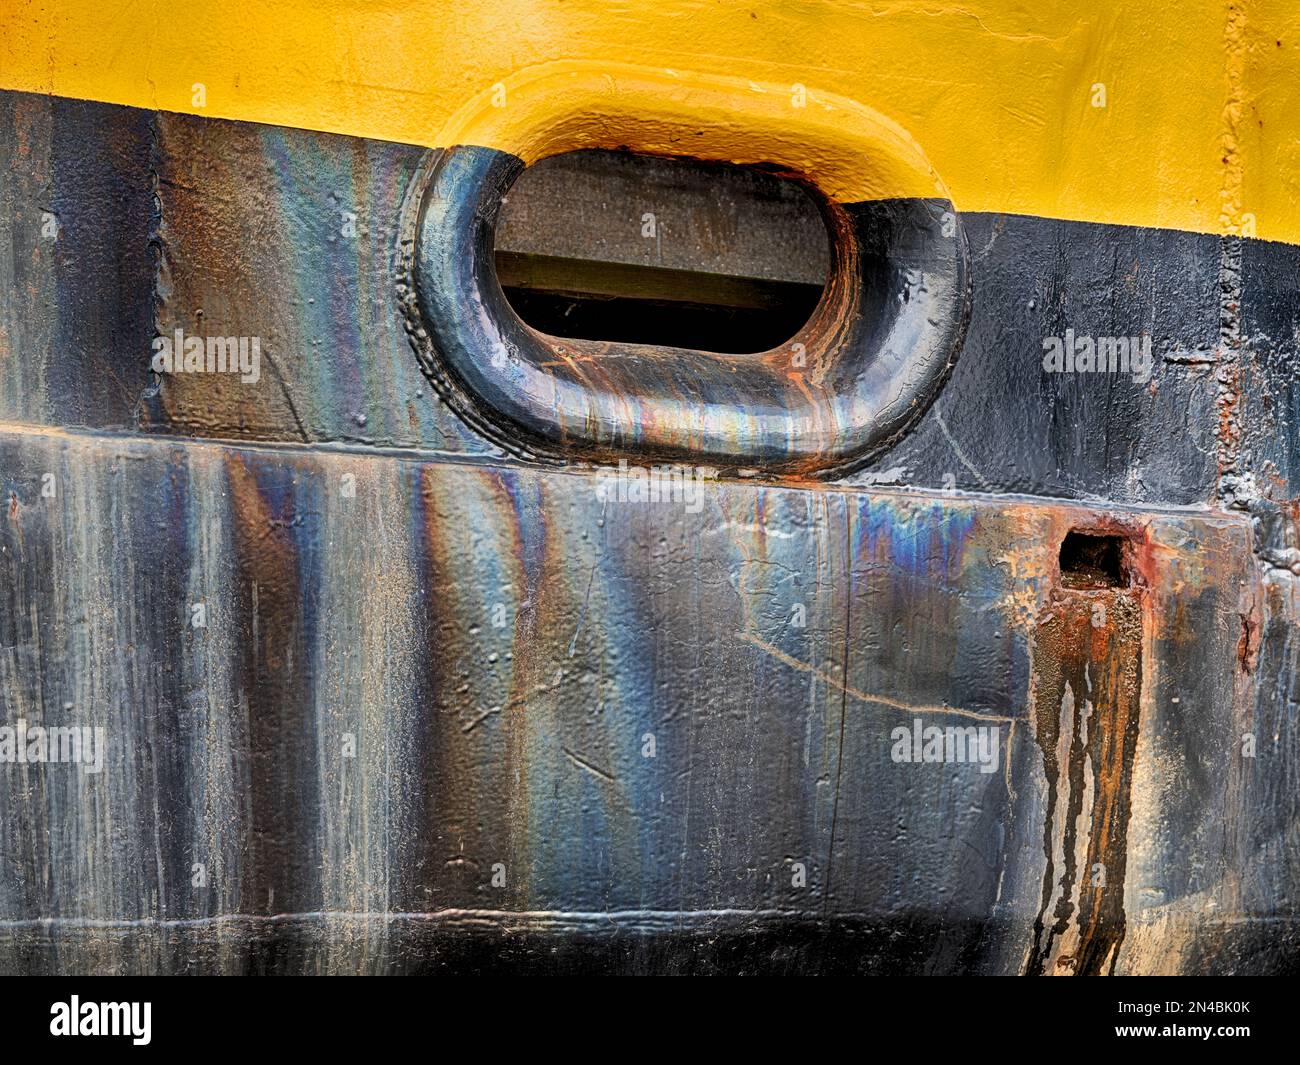 Oil stains provide an oily sheen over the yellow and black hull of a fishing boat in Seattle. Stock Photo